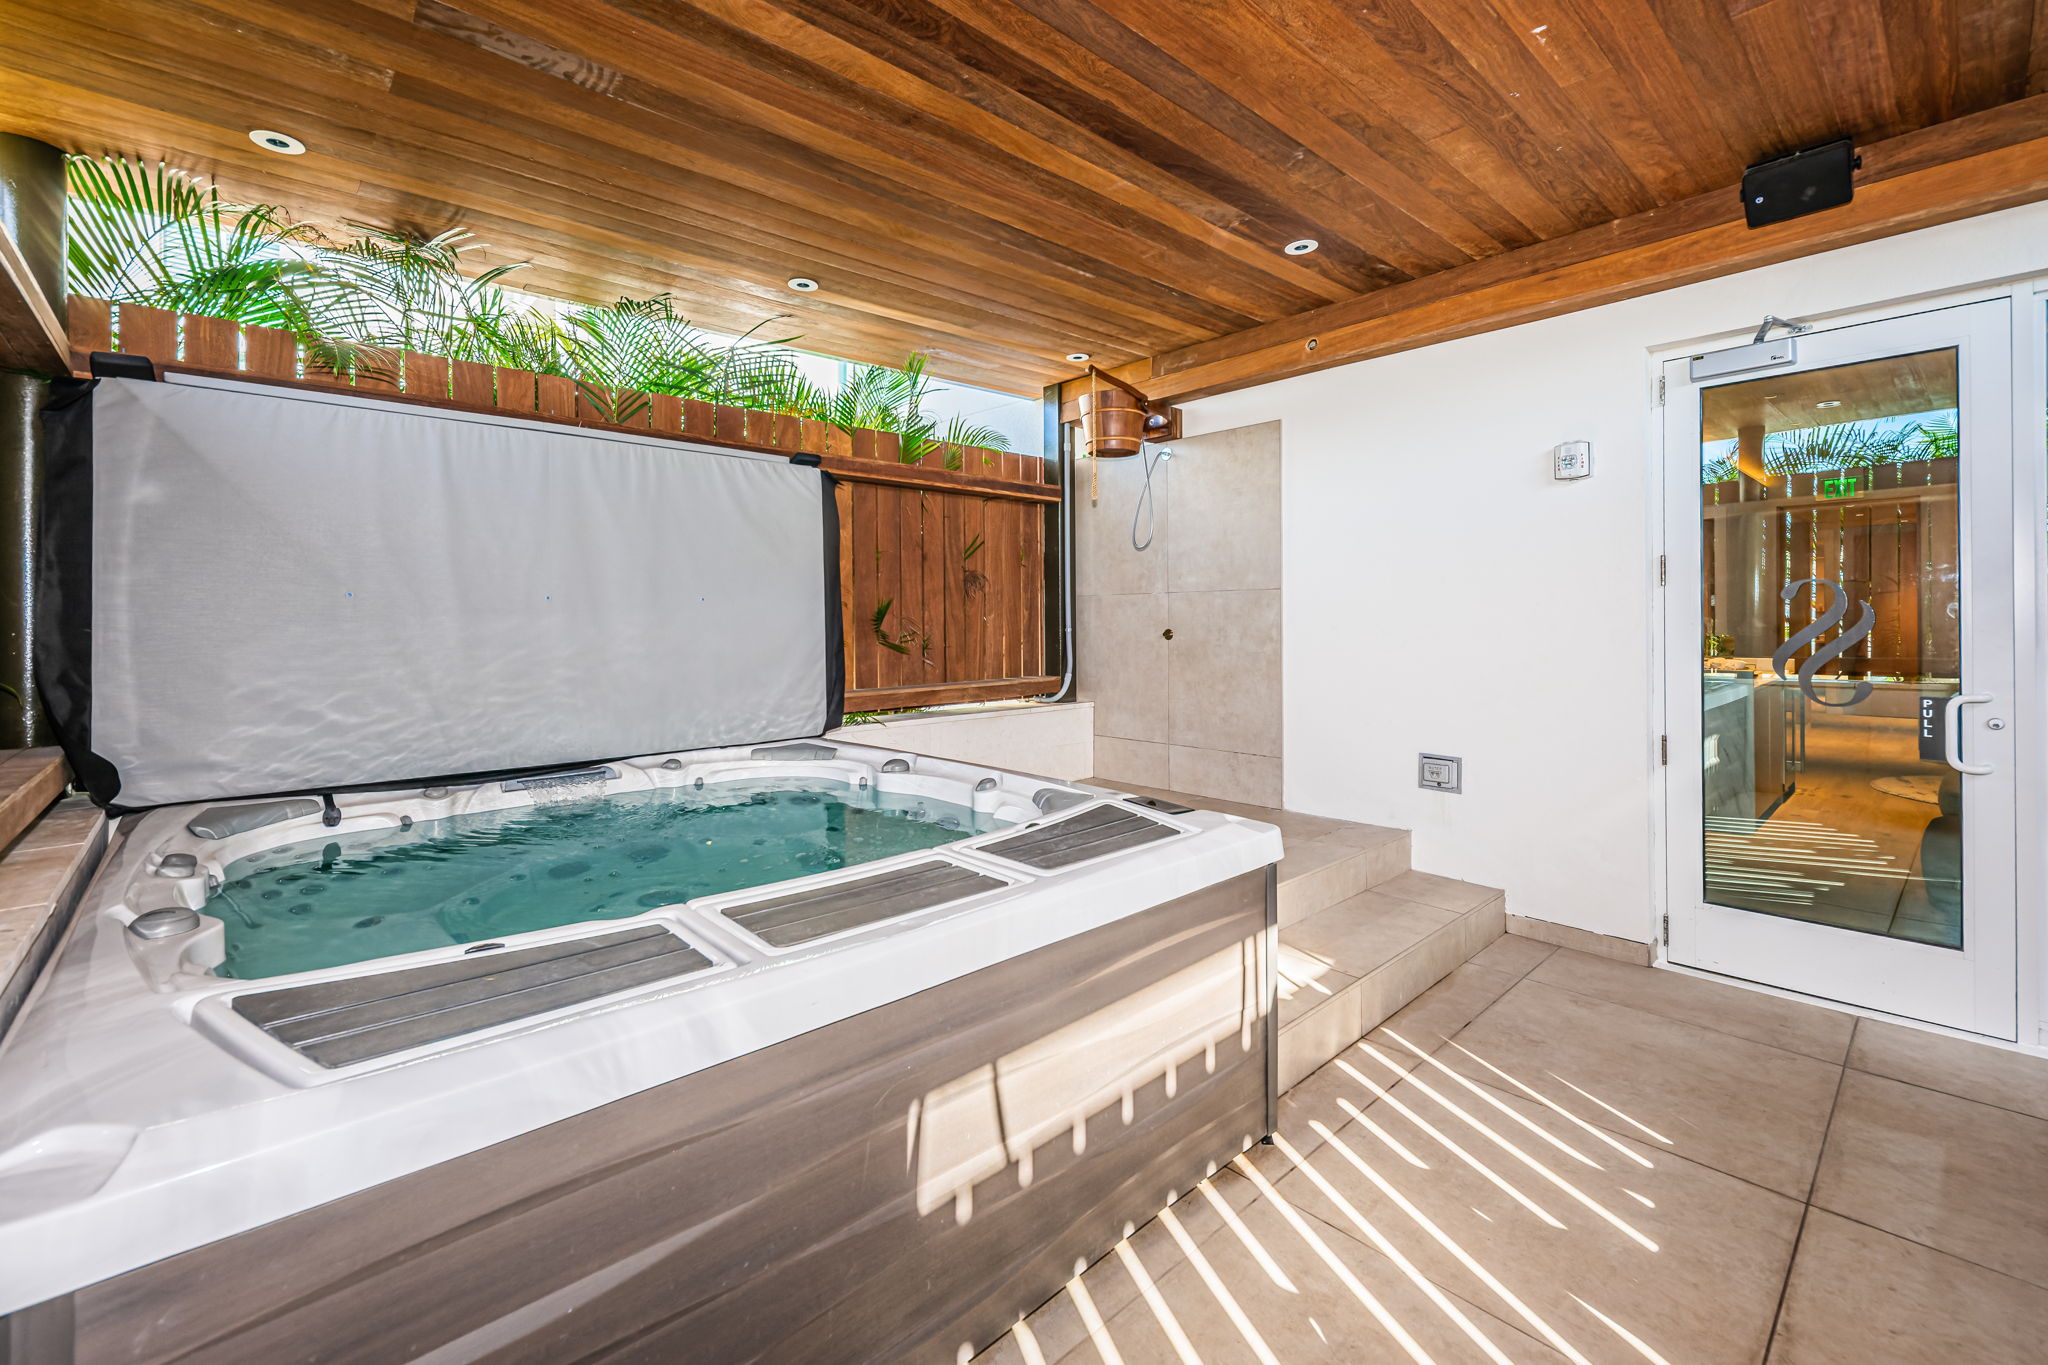 Spa Private Jacuzzi and Shower9